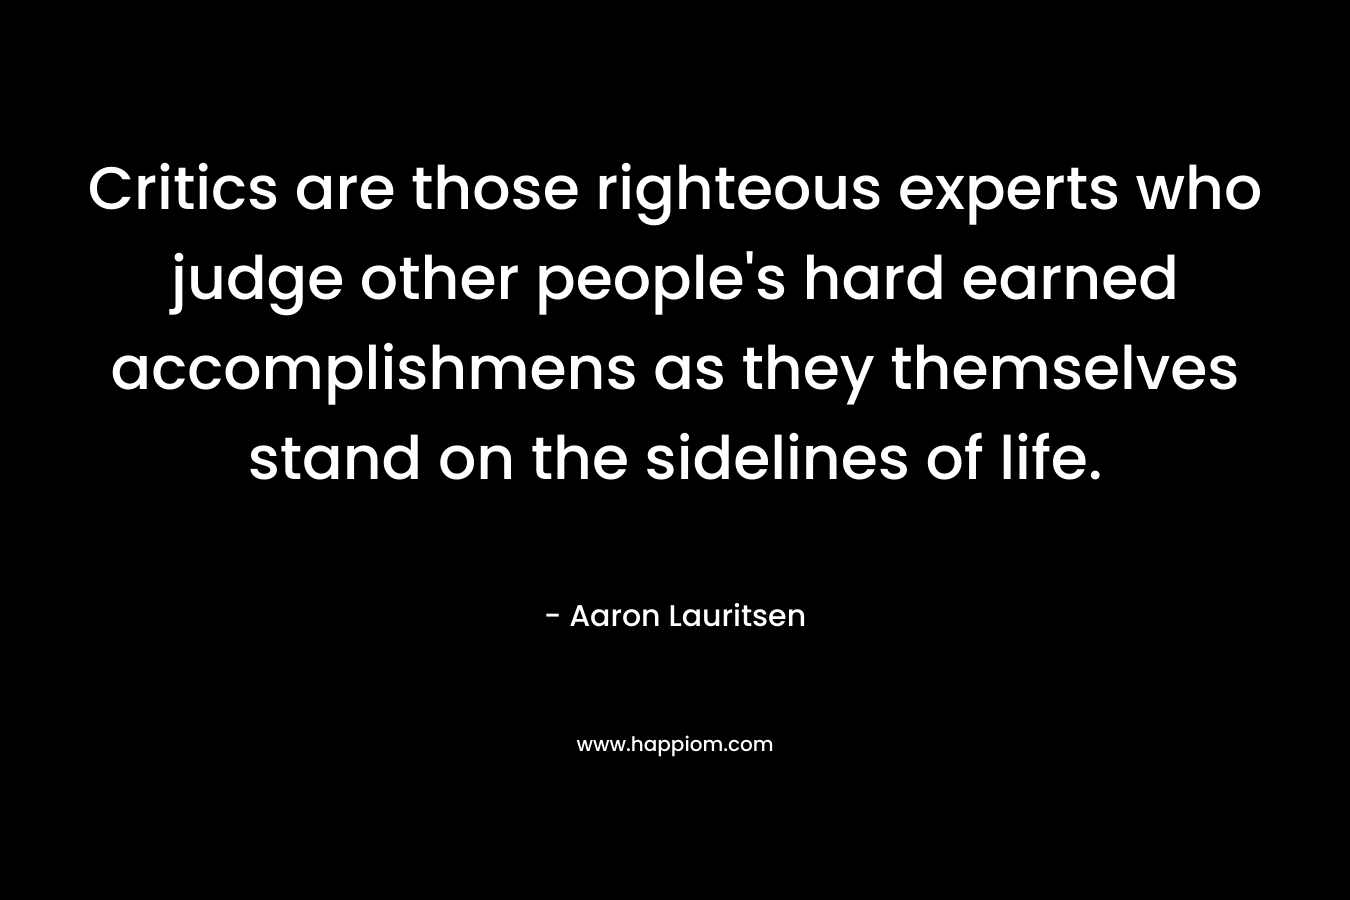 Critics are those righteous experts who judge other people’s hard earned accomplishmens as they themselves stand on the sidelines of life. – Aaron Lauritsen